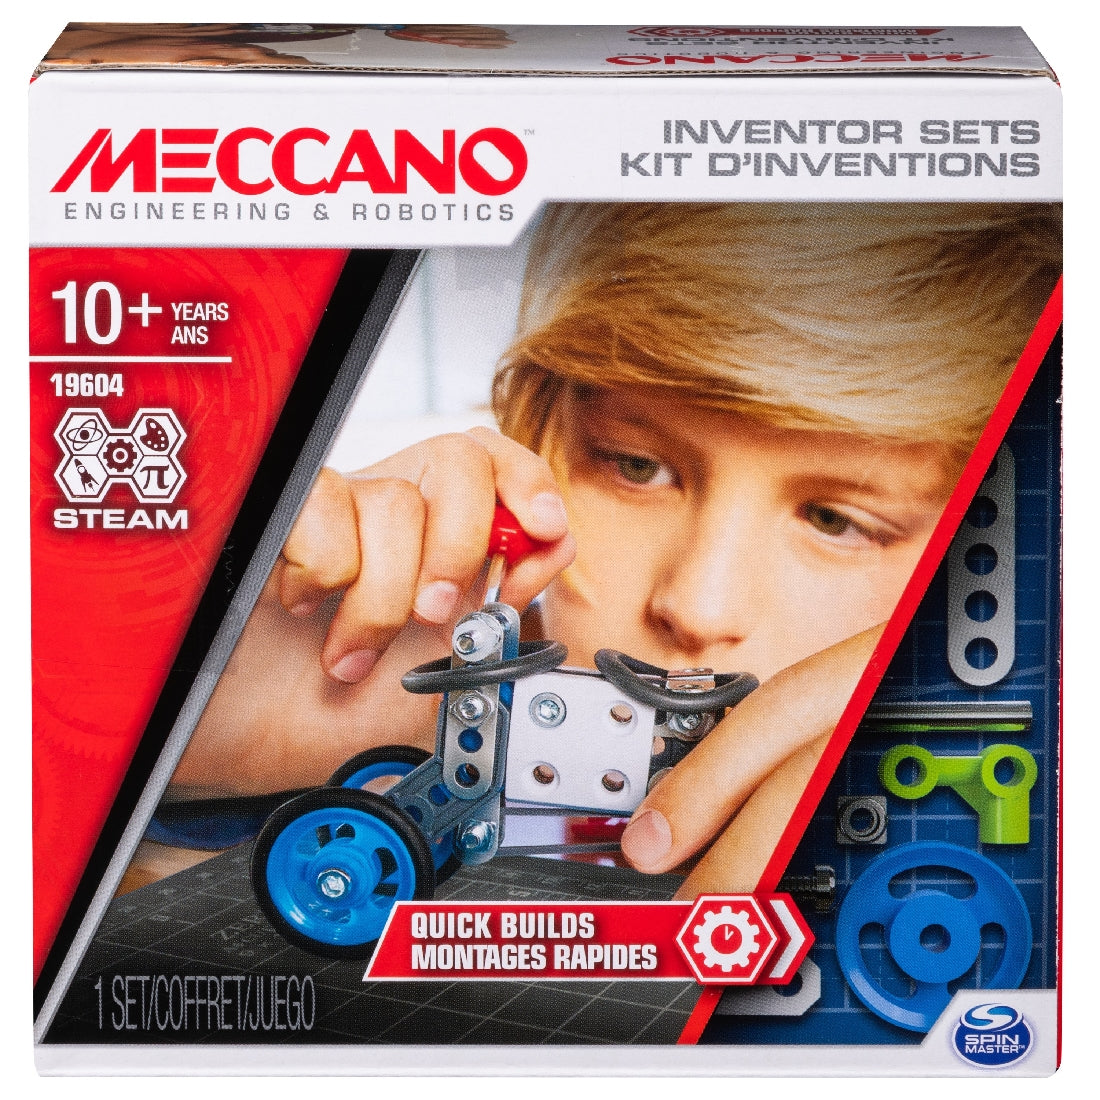 MECCANO QUICK BUILDS INNOVATION SETS